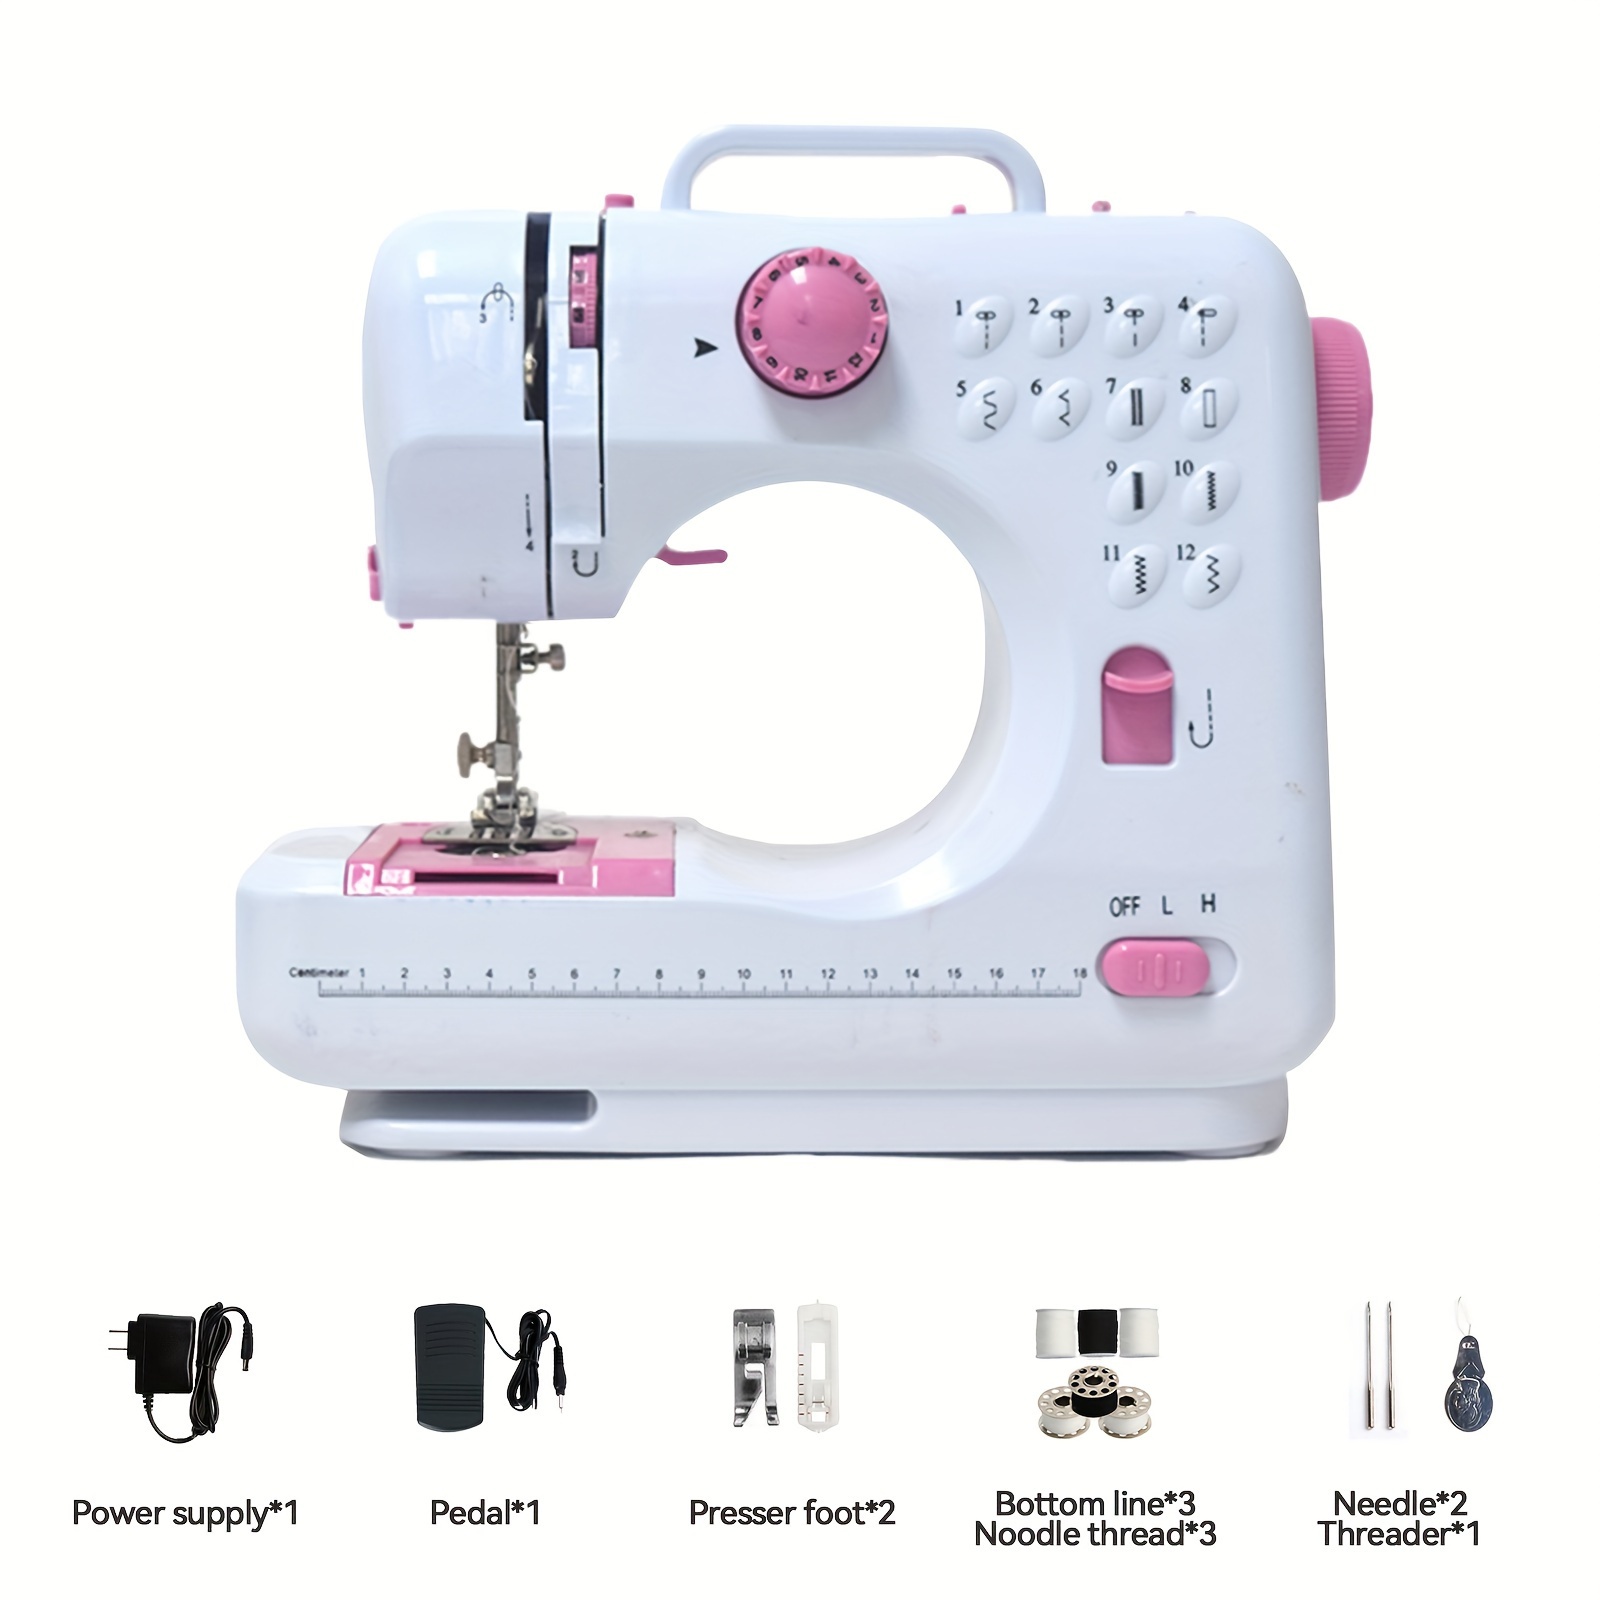 

Electric Sewing Machine Portable, Multifunctional 12 Built-in Stitches Sewing Machine With Light And Adjustable Sewing Speed, Household Sewing Crafting Machine (pink, Blue, Purple Optional)